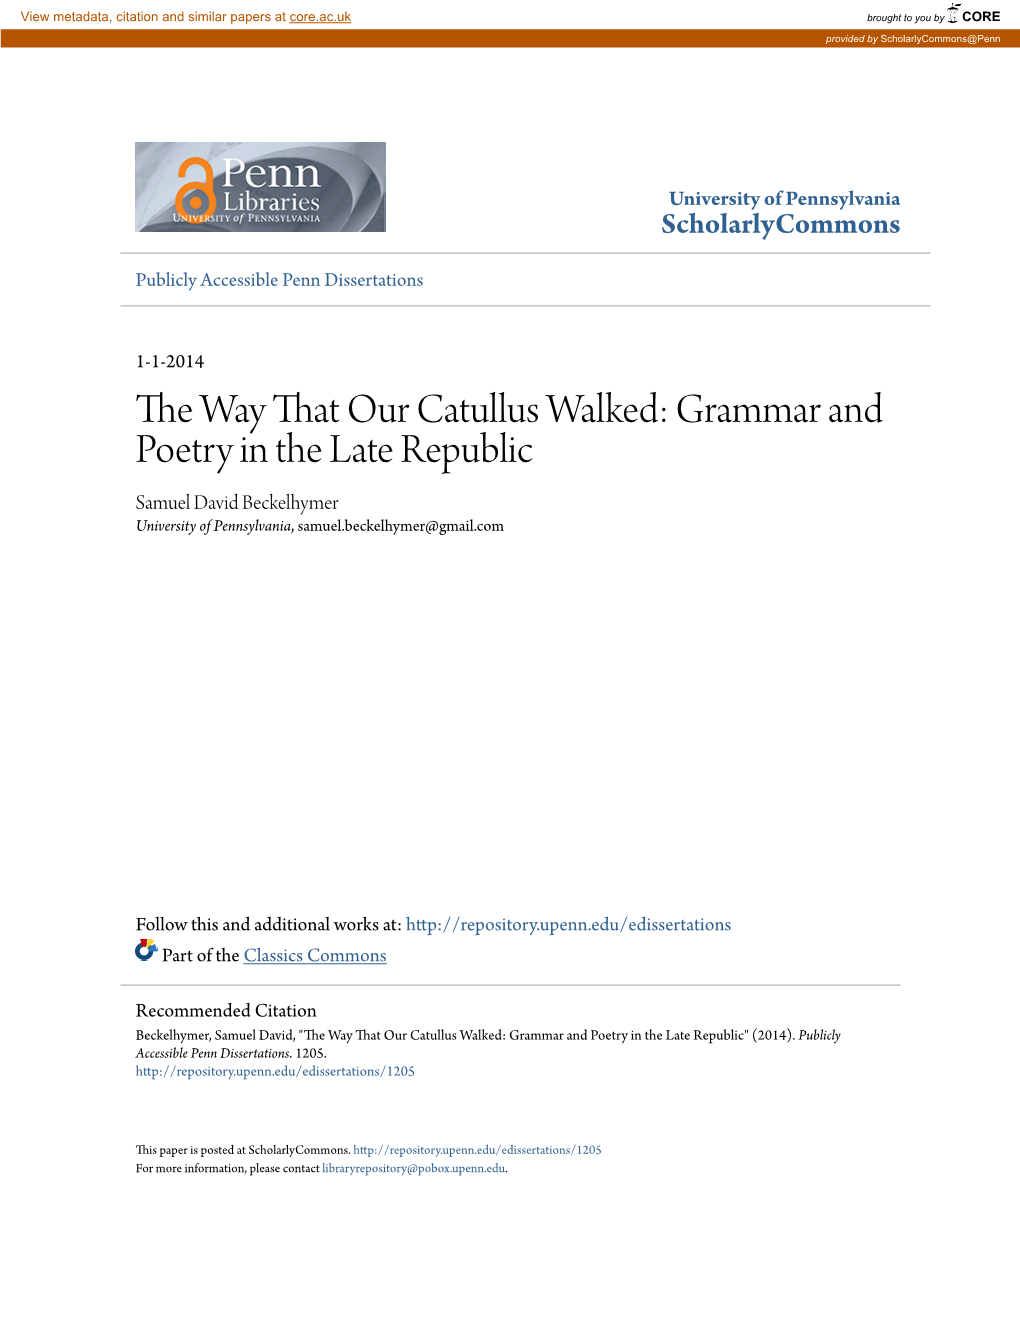 THE WAY THAT OUR CATULLUS WALKED: GRAMMAR and POETRY in the LATE REPUBLIC Samuel D